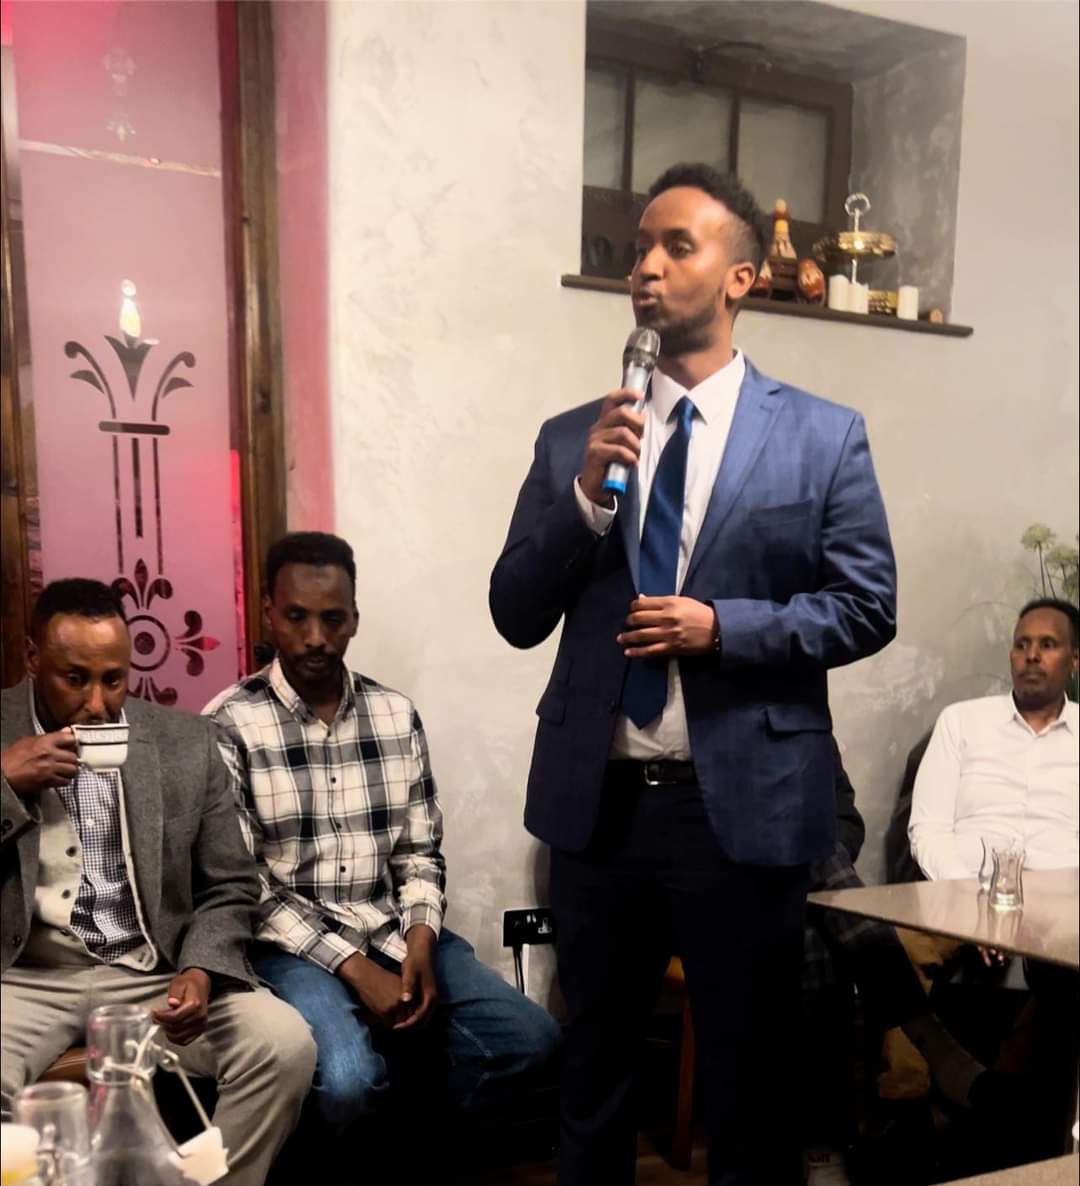 First and foremost I would like to thank @ZakiSyedomar  and the Somali community in #bristol  for organising campaign Iftar/dinner for me this evening at #GoGoLounge. I am pleased to have the Somali community full support and trust. I look forward to represent them in…